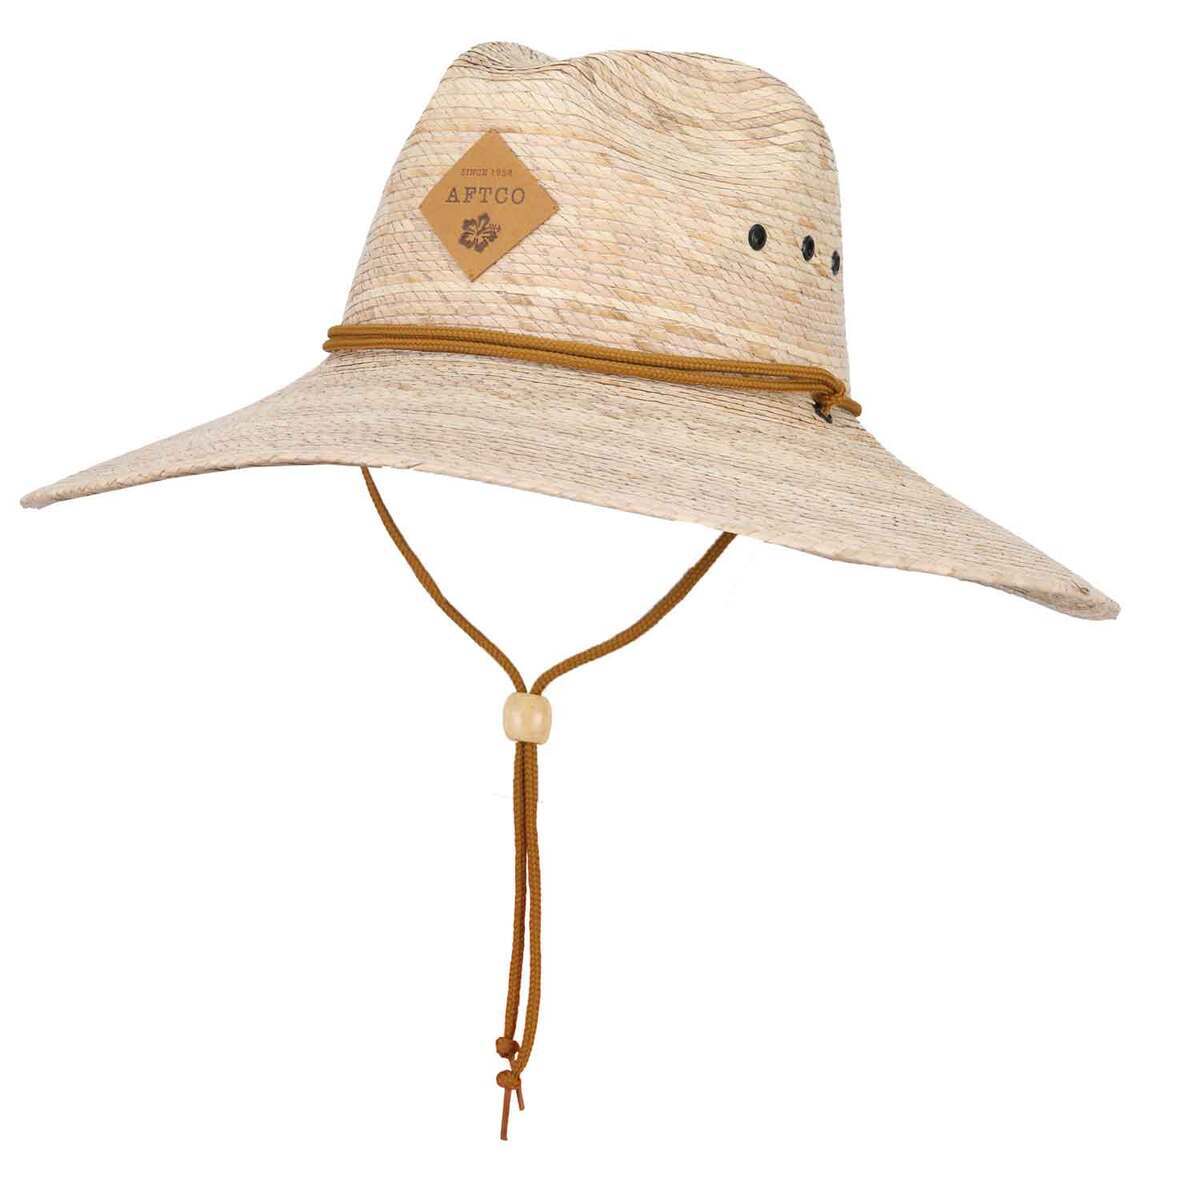 AFTCO Dream Catcher Straw Sun Hat - Natural One Size Fits Most by Sportsman's Warehouse